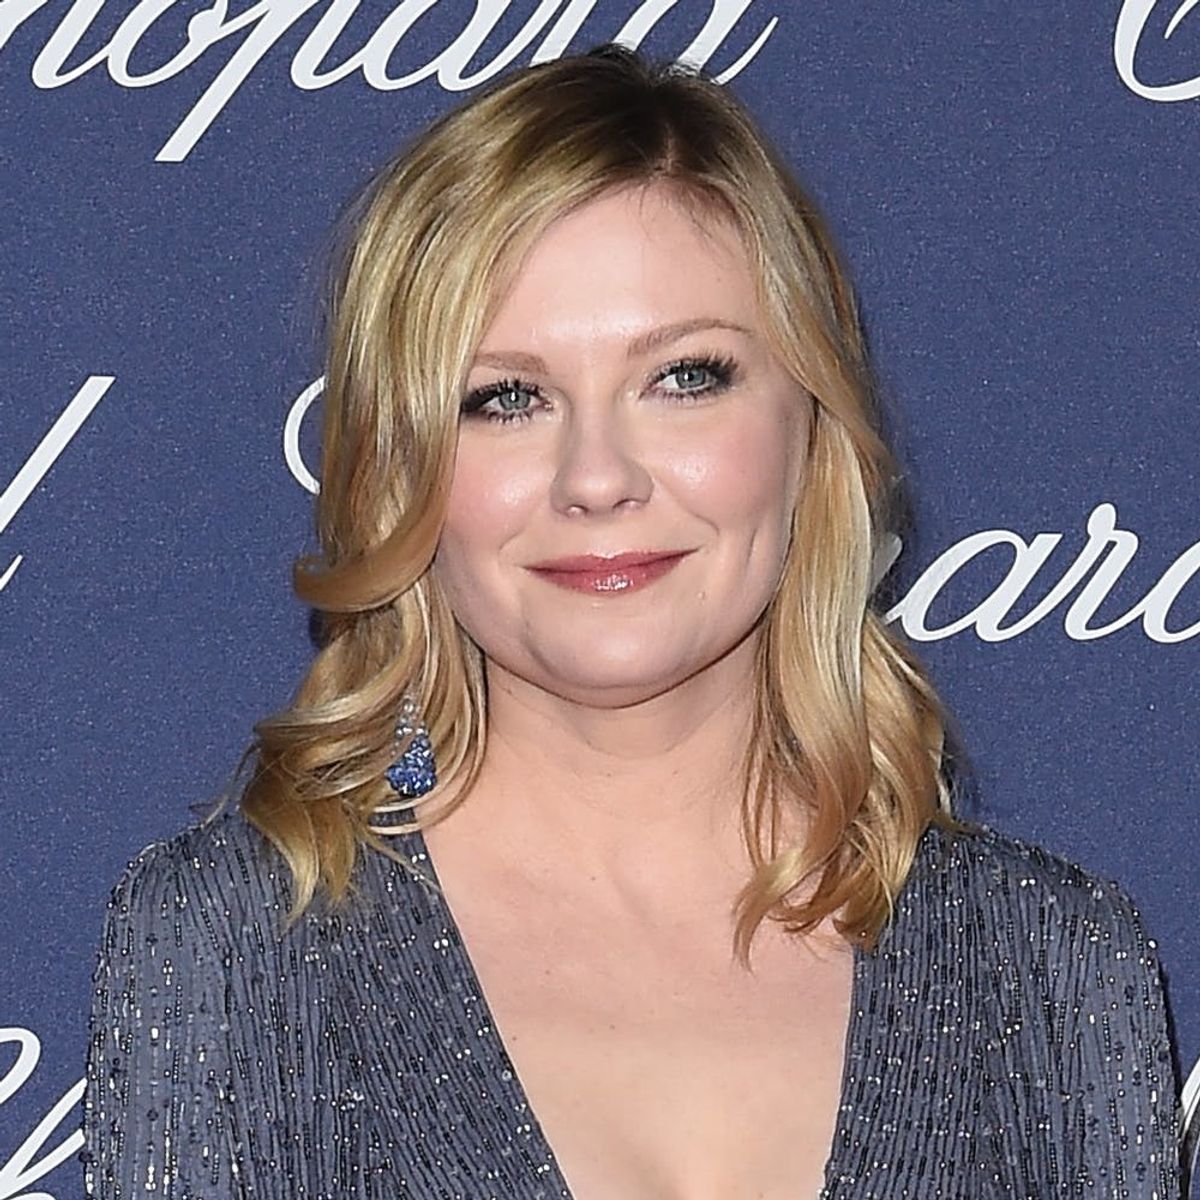 Kirsten Dunst Is Reportedly Engaged and Flashing Her Diamond Ring